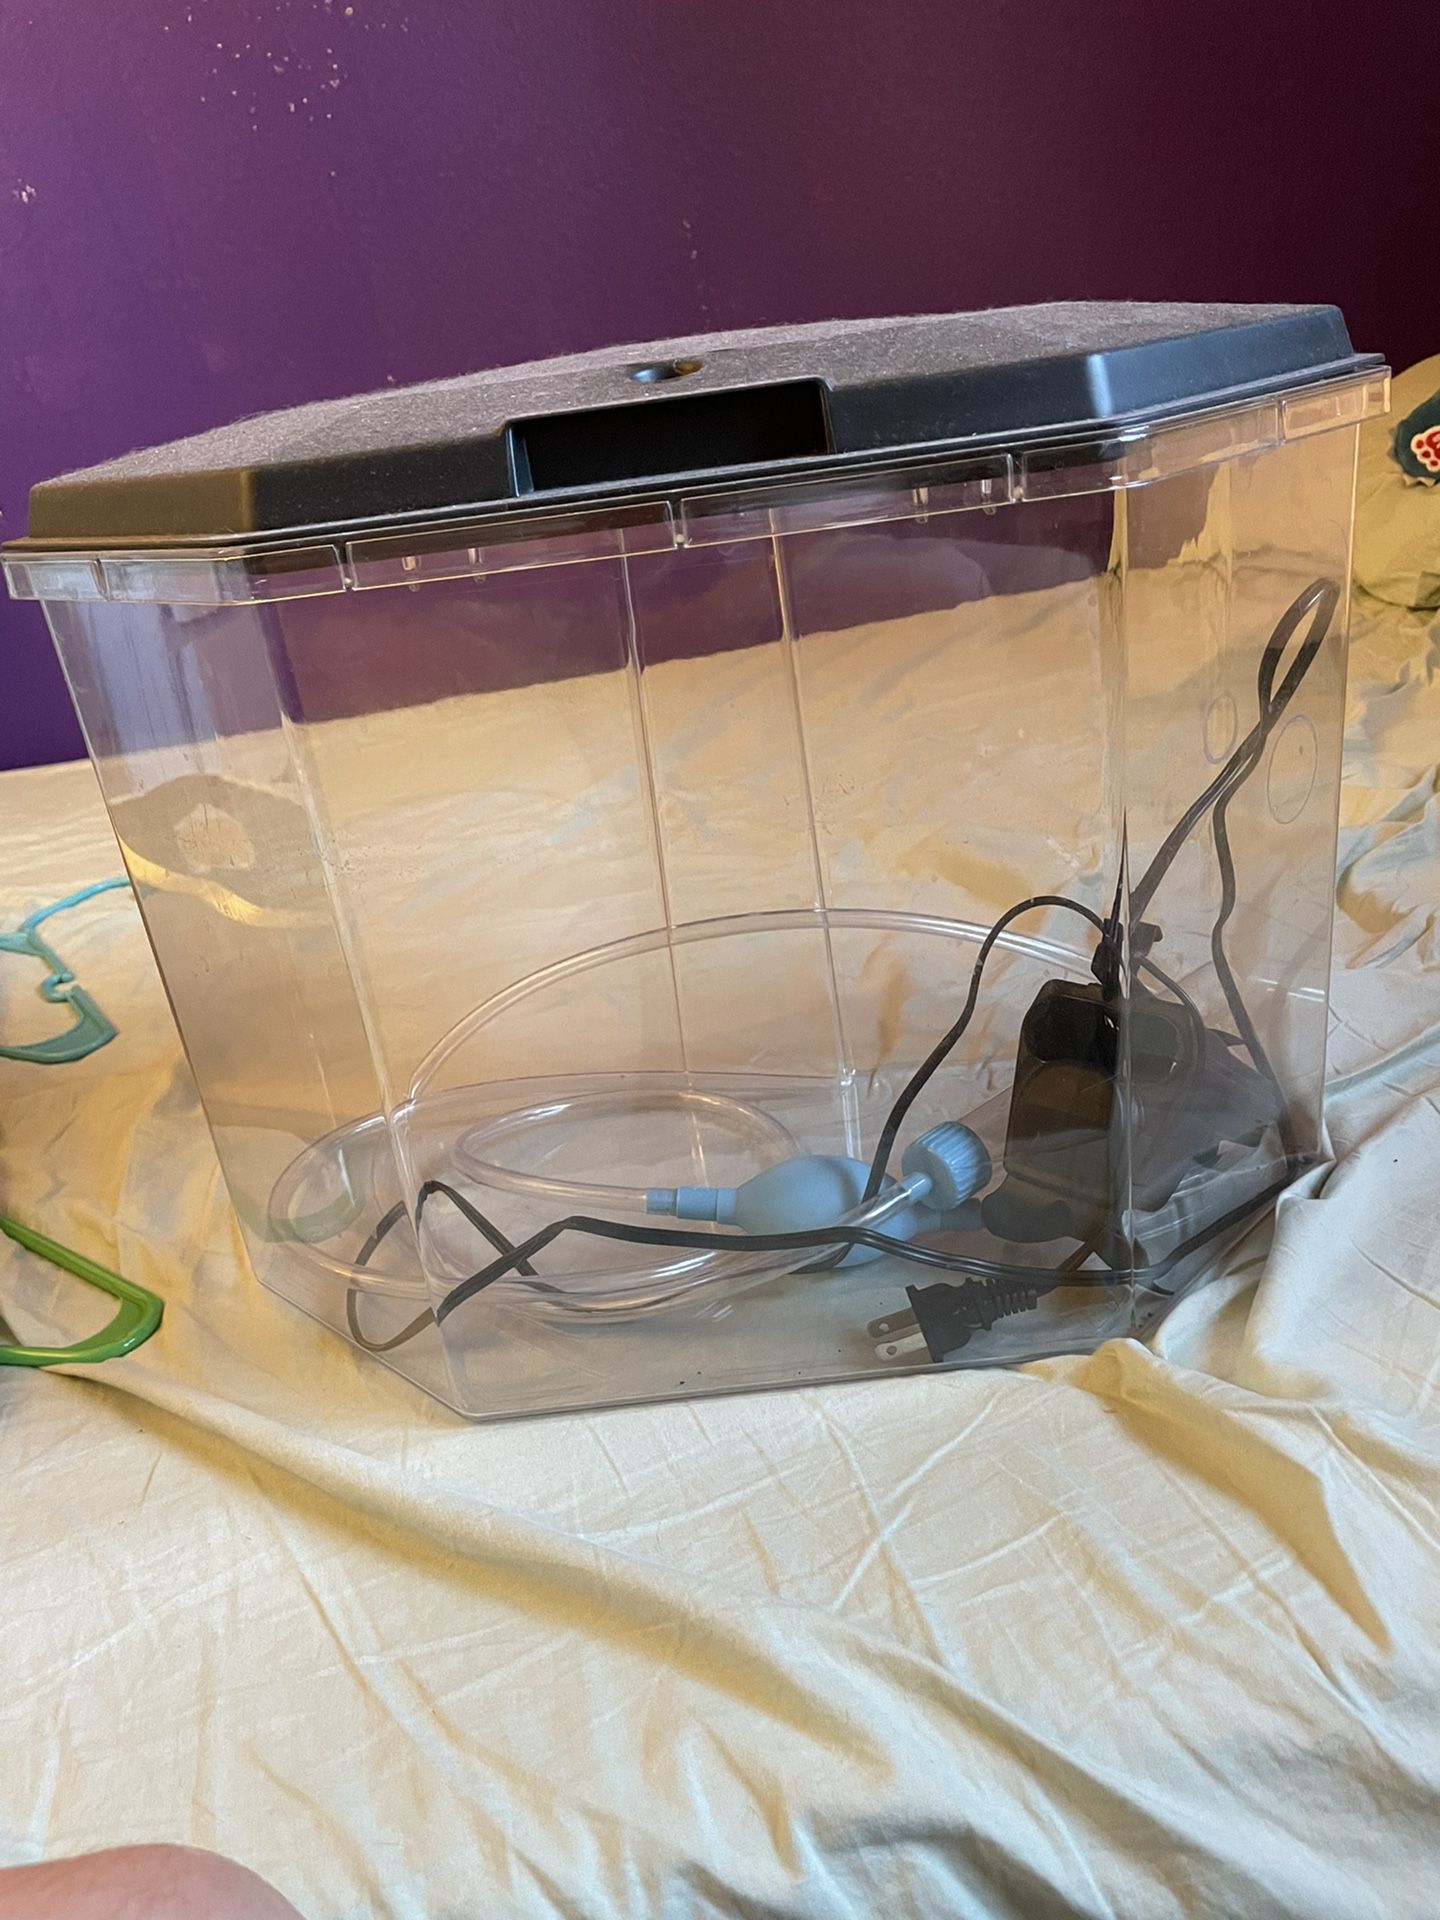 5 Gallon Aquarium With Cleaning Pump And Filter Included!